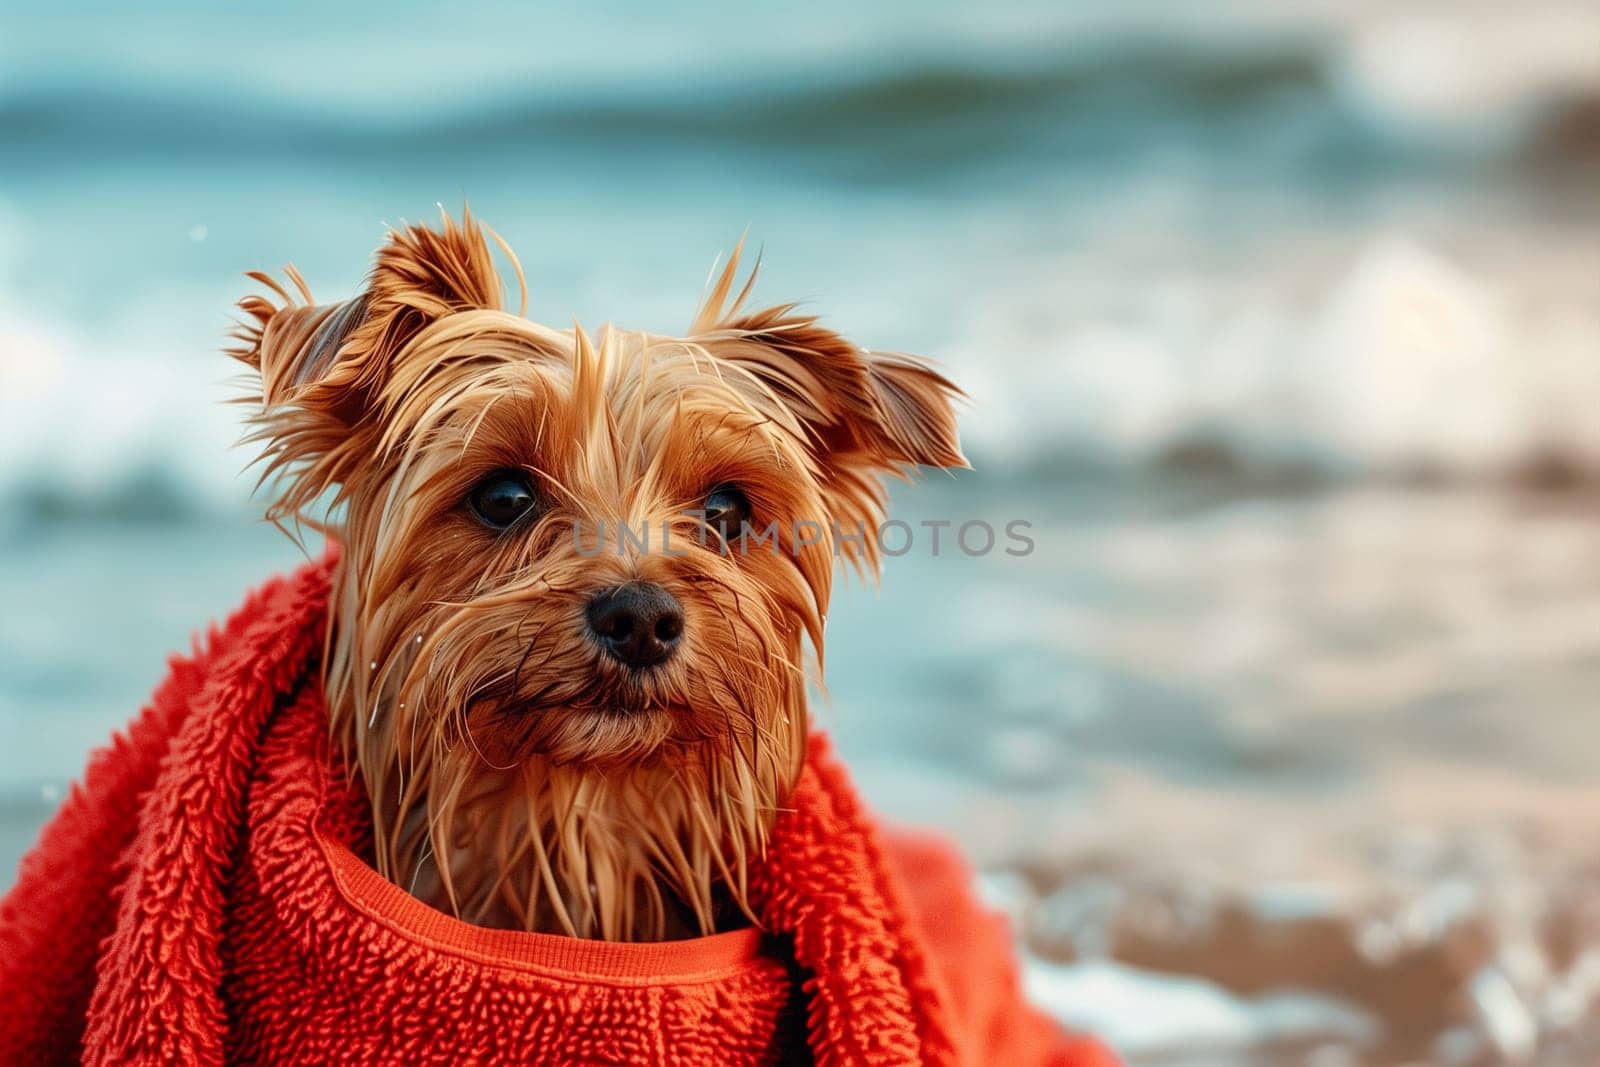 A small brown dog proudly wears a vibrant red scarf around its neck, showcasing its stylish accessory.